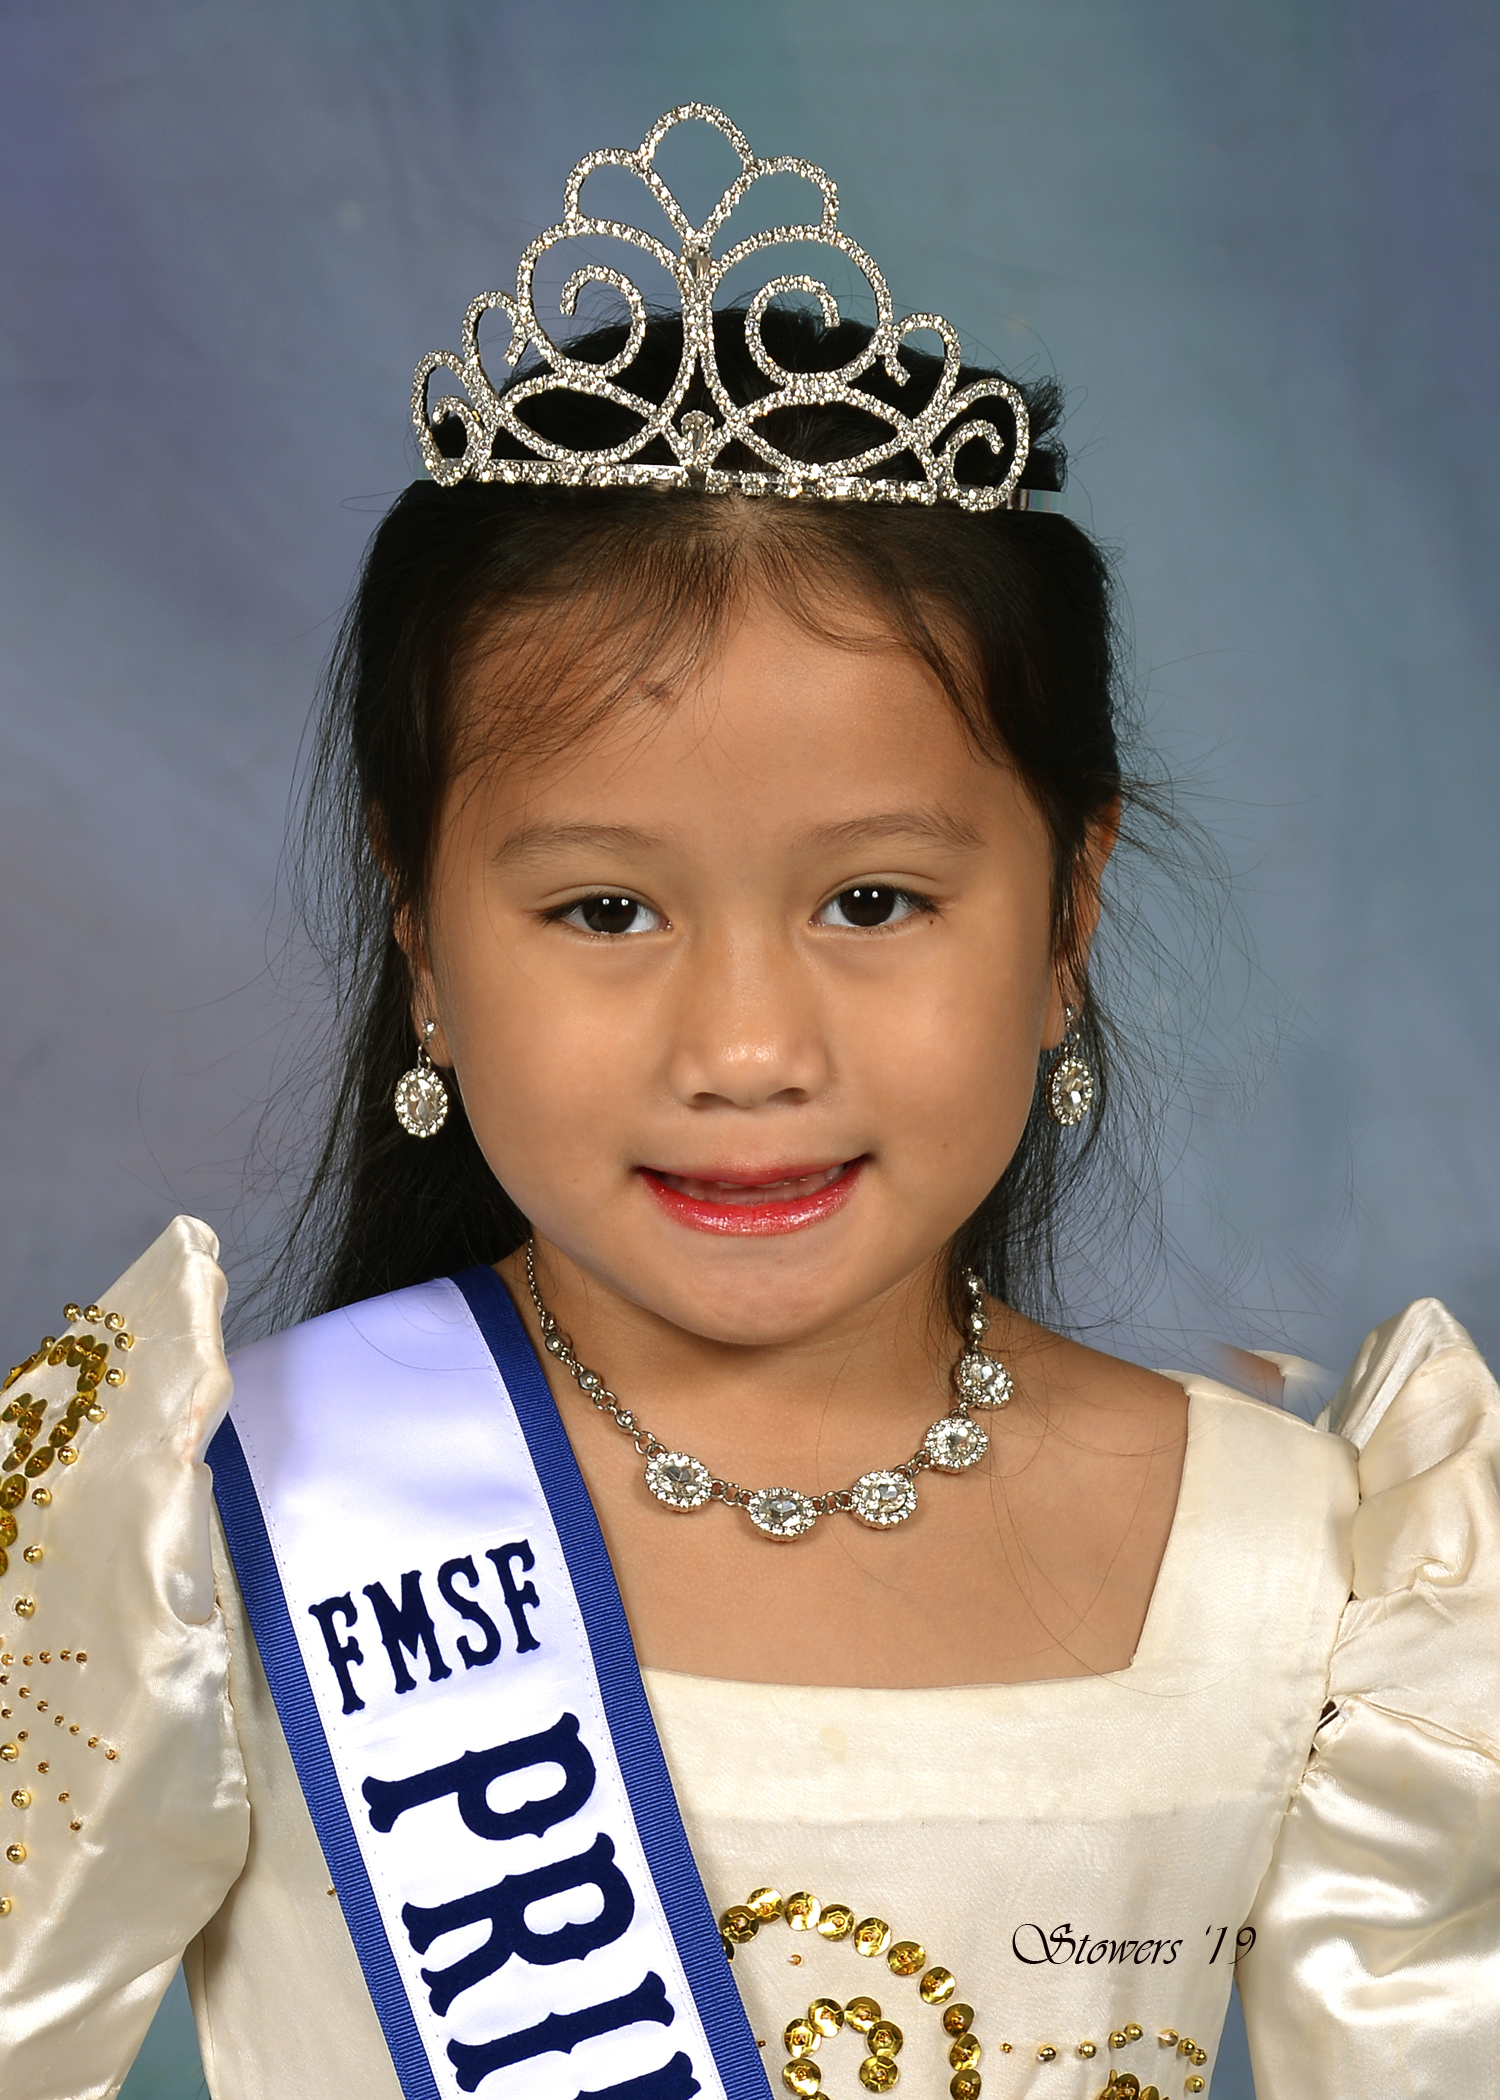 A Pageant For A Cause